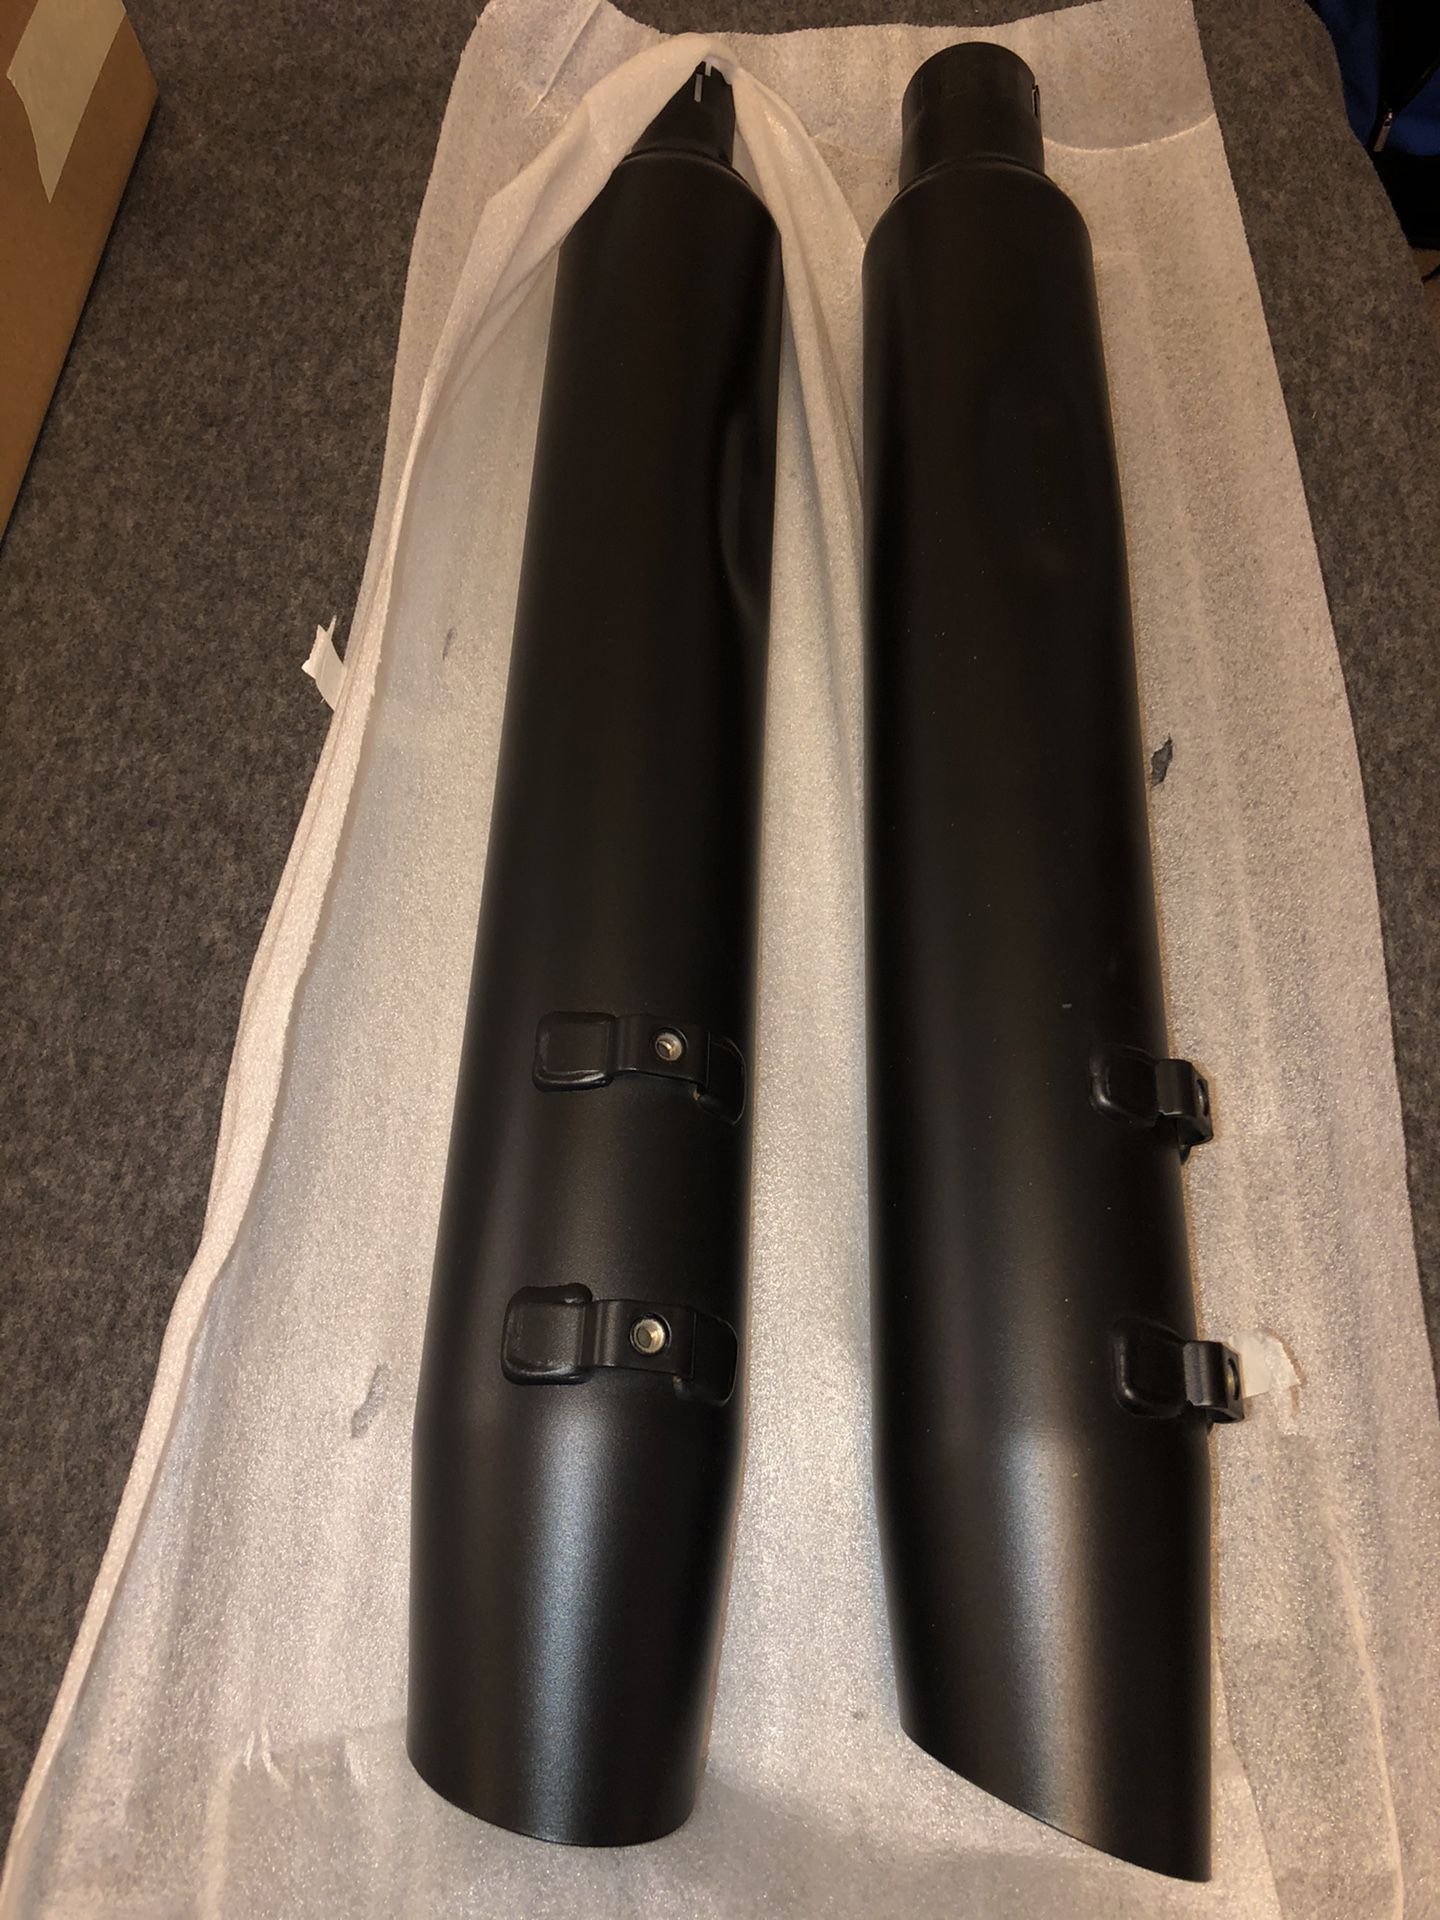 2019 Road Glide Special Stock Mufflers New